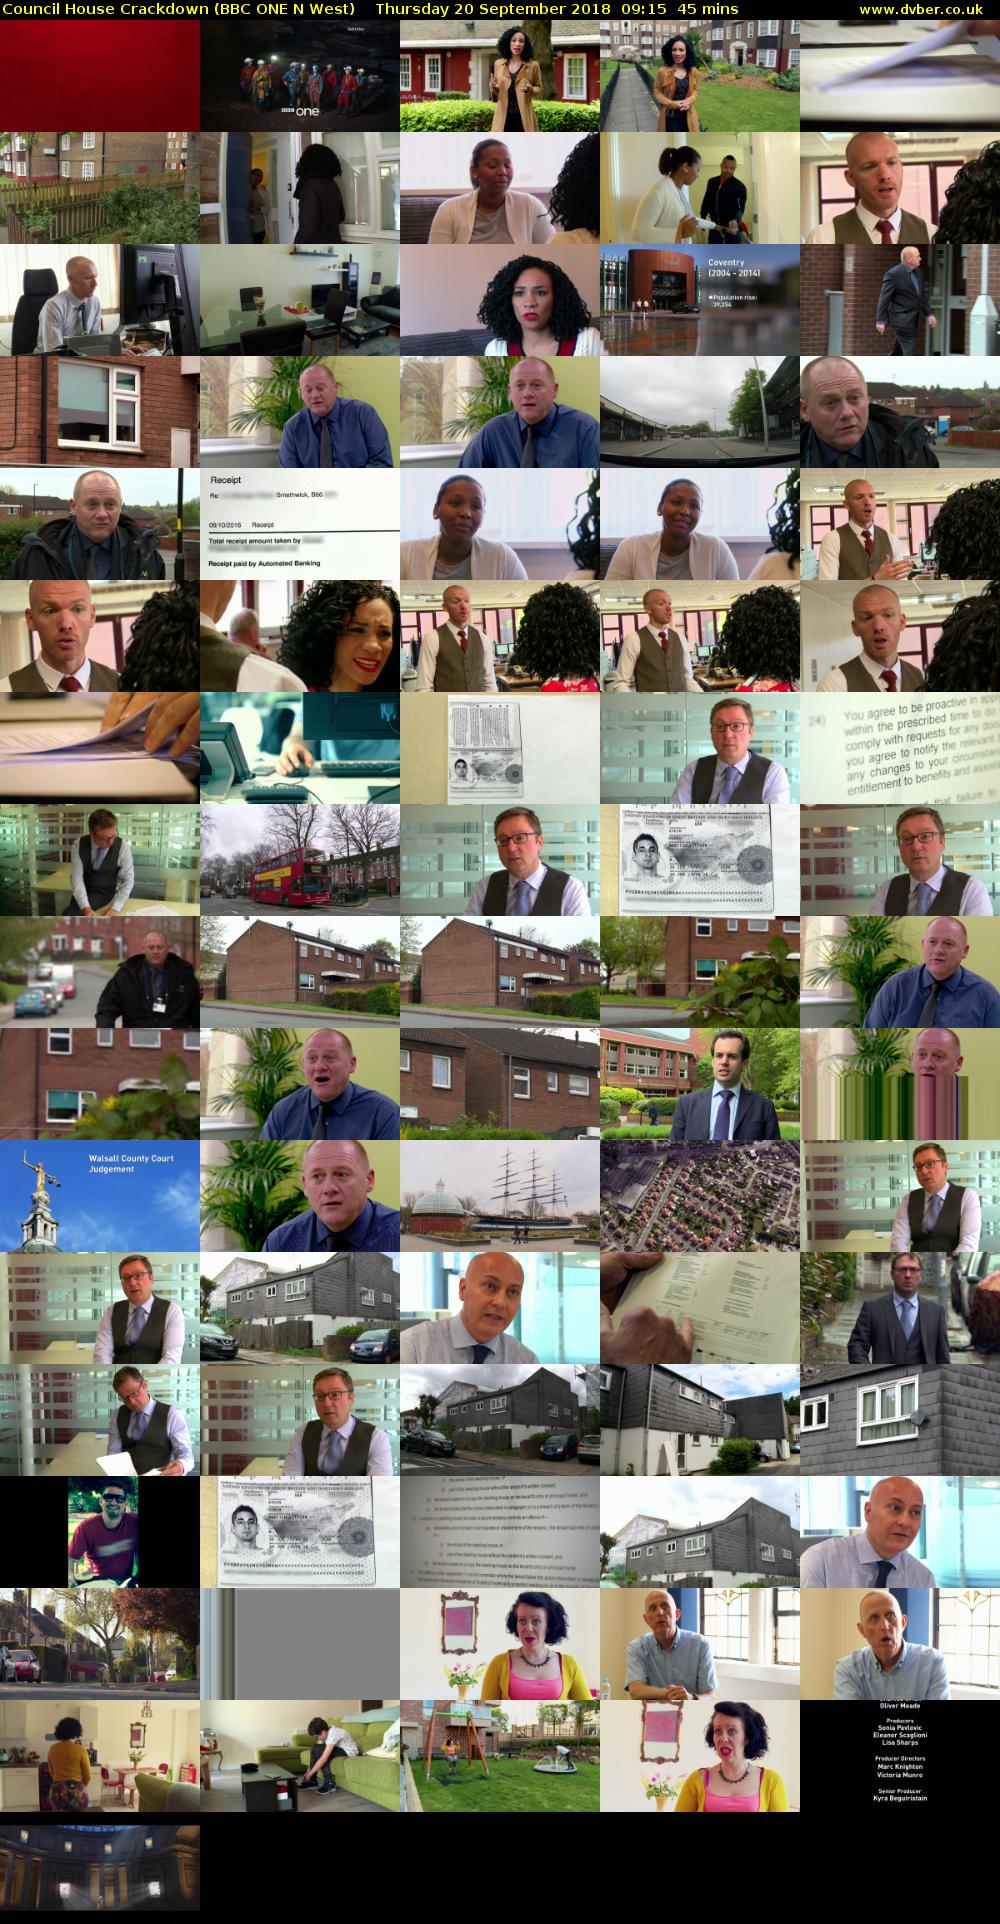 Council House Crackdown (BBC ONE N West) Thursday 20 September 2018 09:15 - 10:00